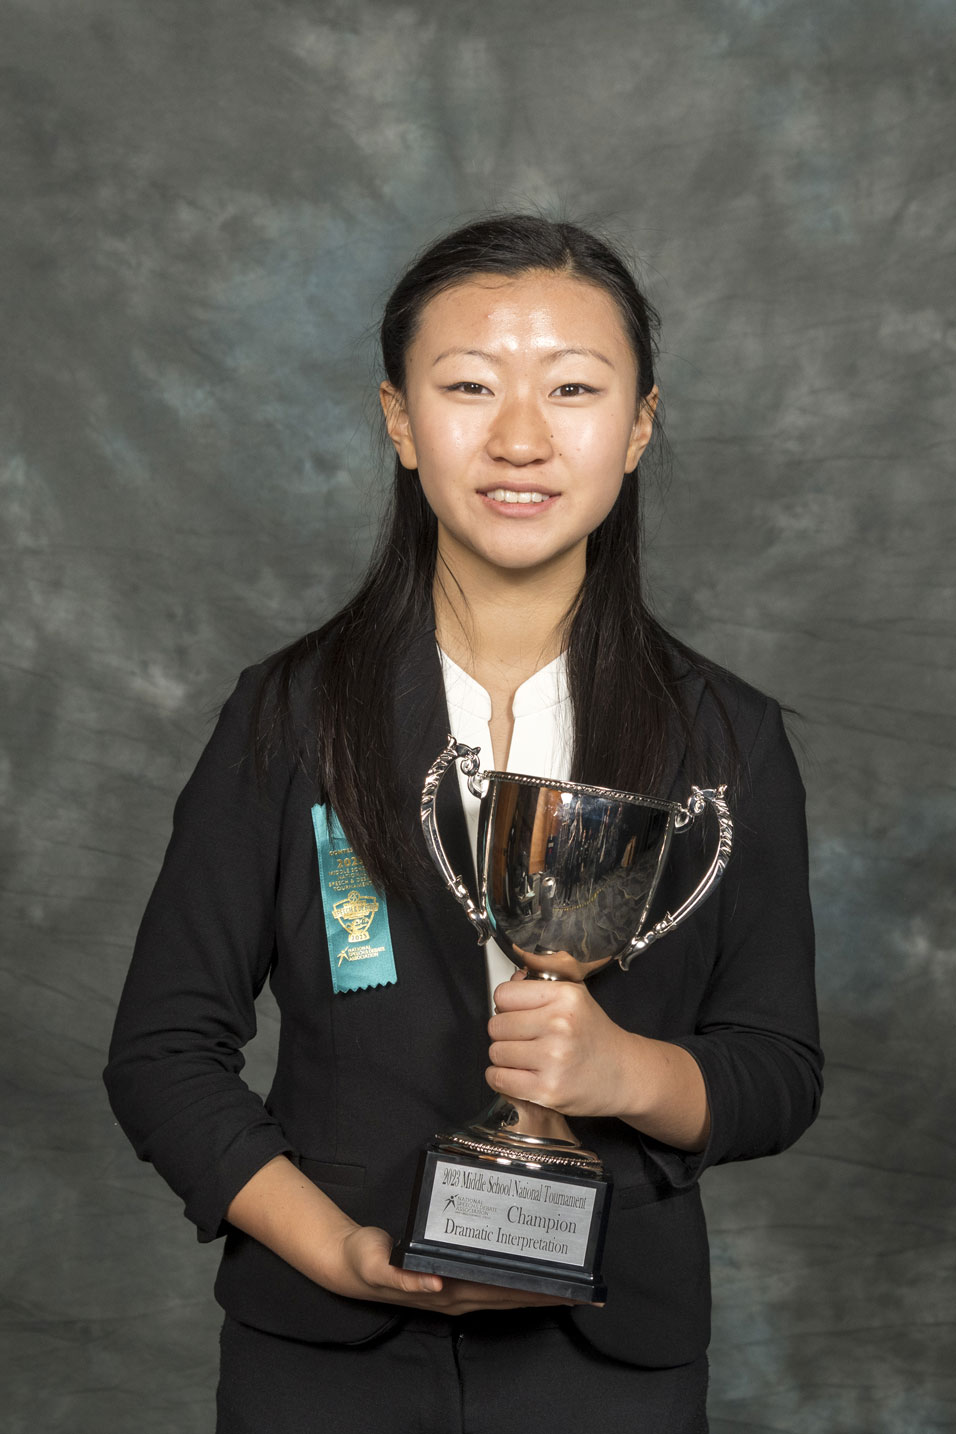 Adeleine Choi from Parks Junior High in California
Coached by Adriena Toghia and Joshua Beckles